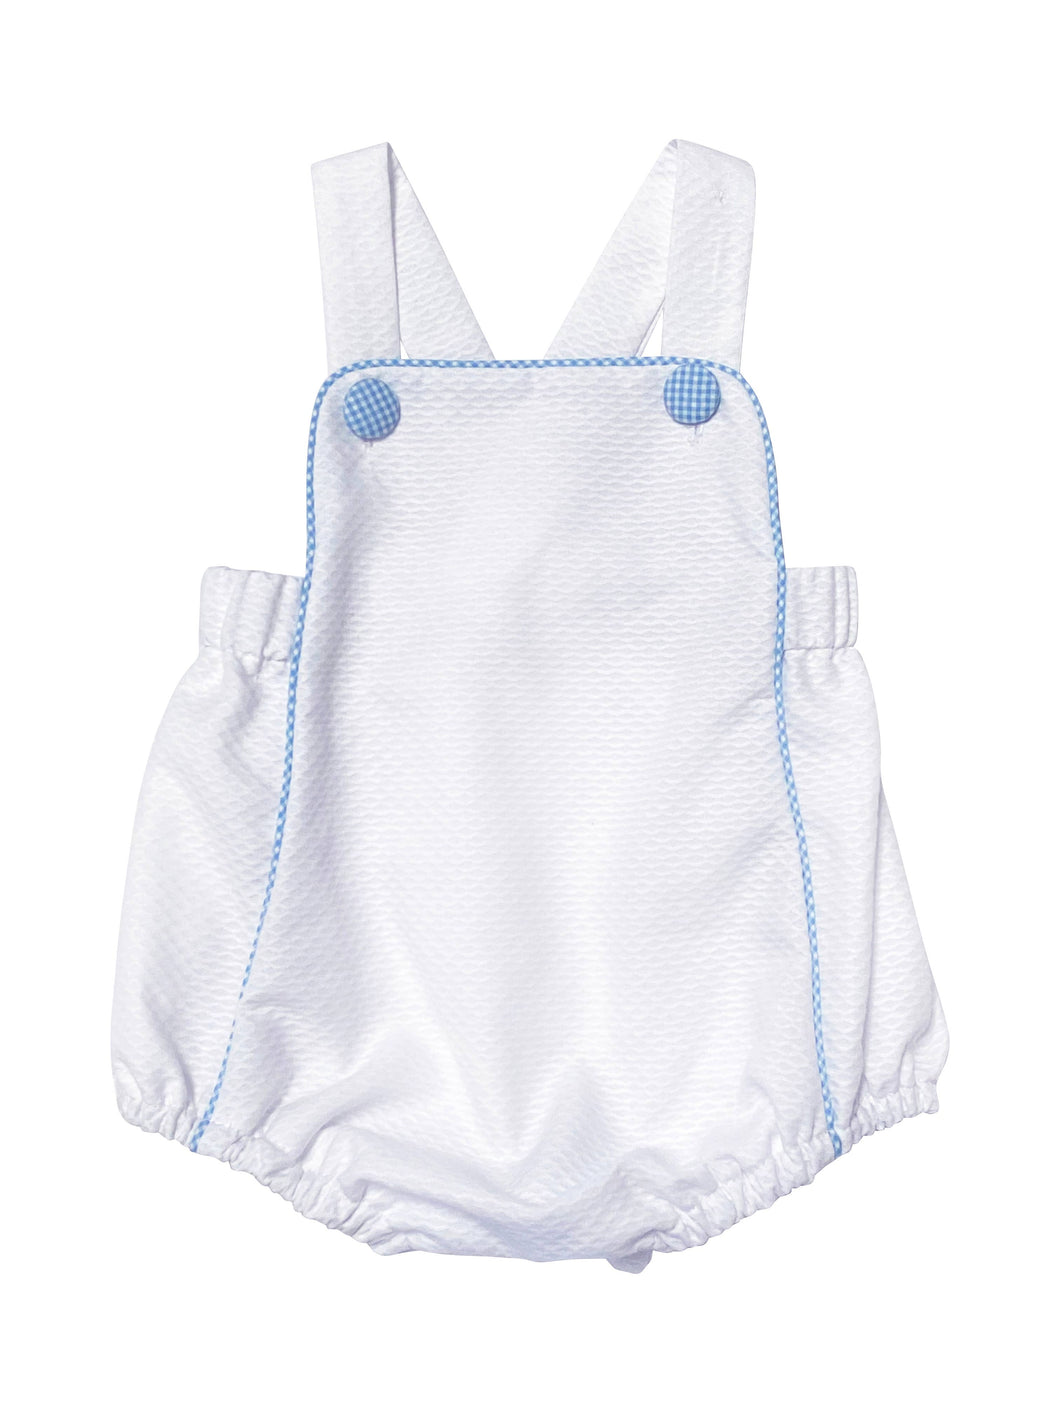 White and Blue baby Boy Strap Romper